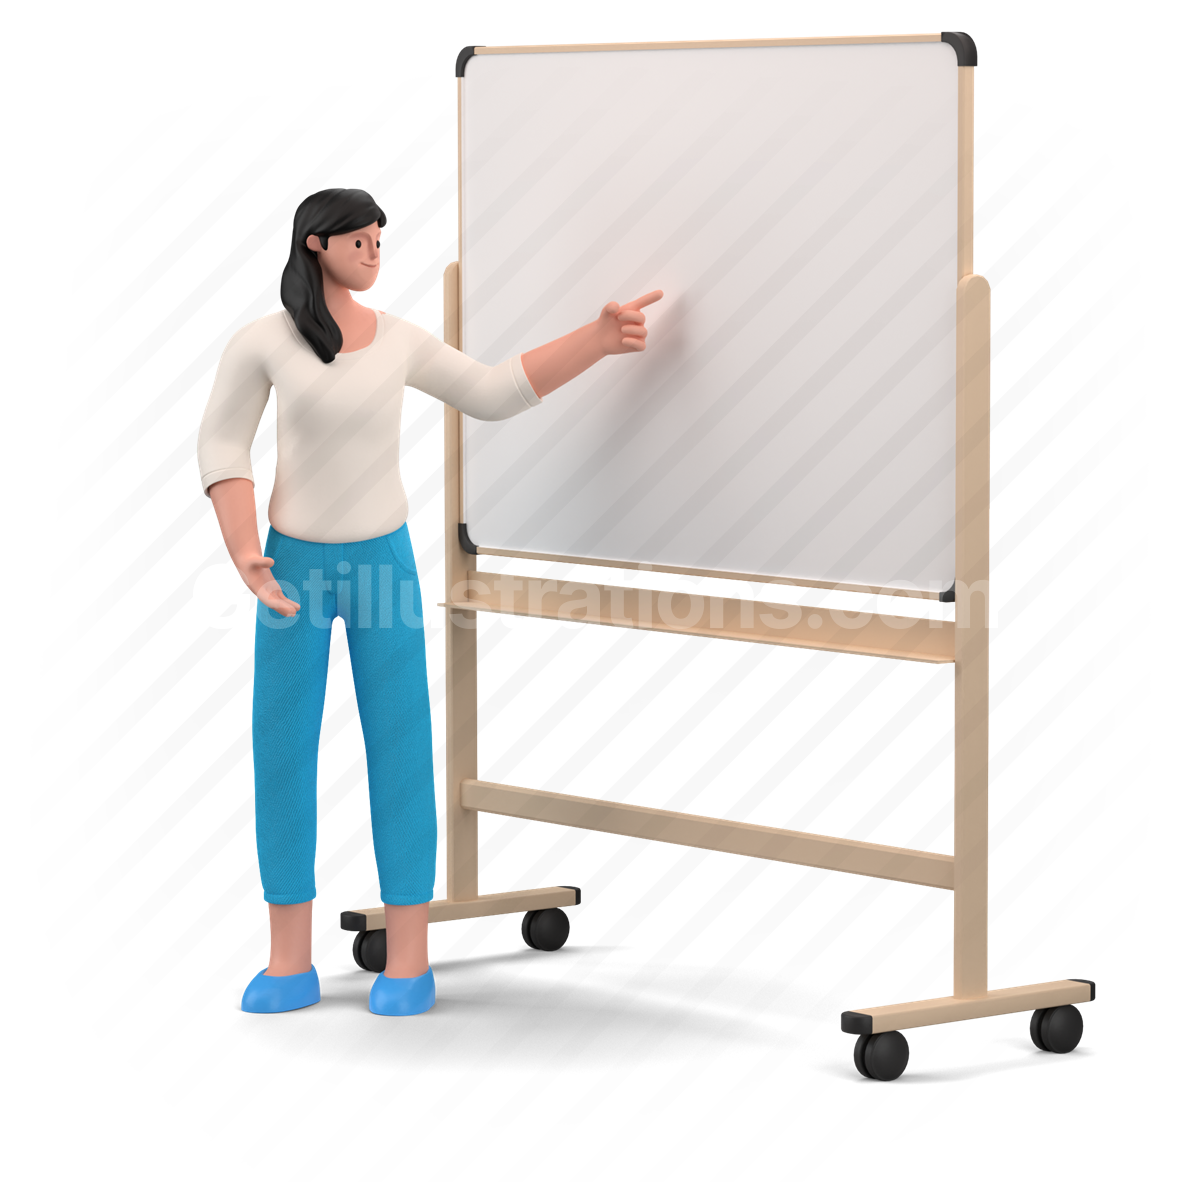 presentation, lecture, whiteboard, education, projection, project, woman